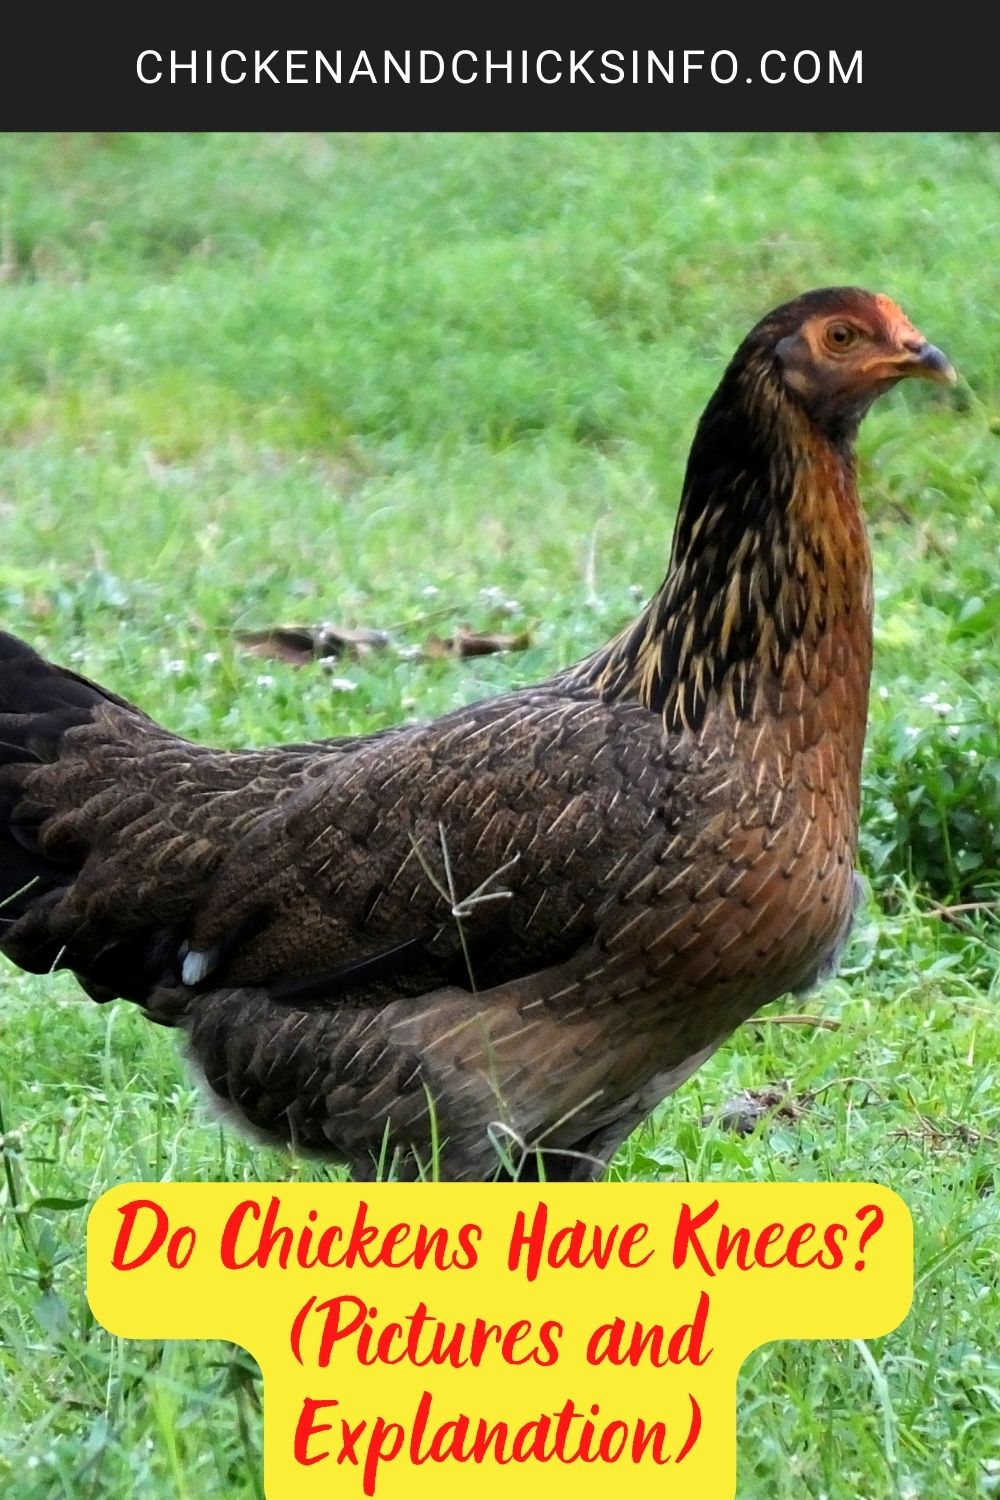 Do Chickens Have Knees? (Pictures and Explanation) poster.
